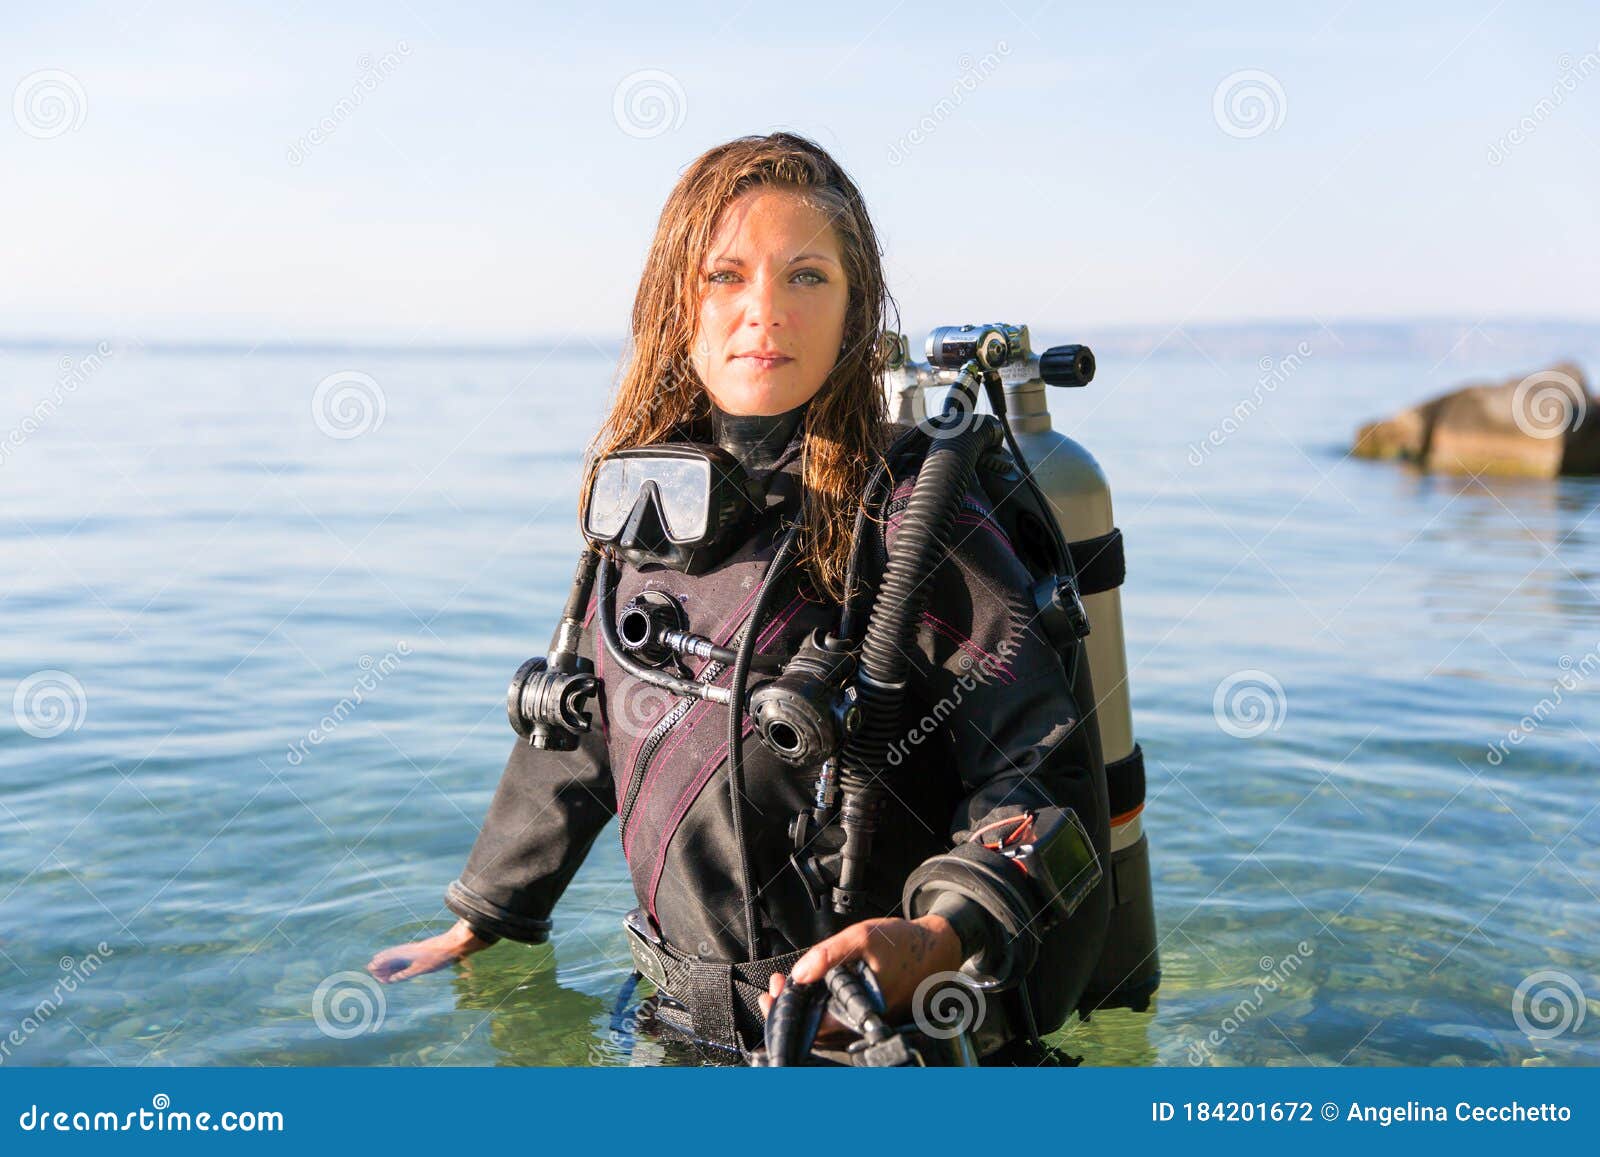 female scuba diving instructor standing in water wearing a dry suit, a twin tank and holding fins